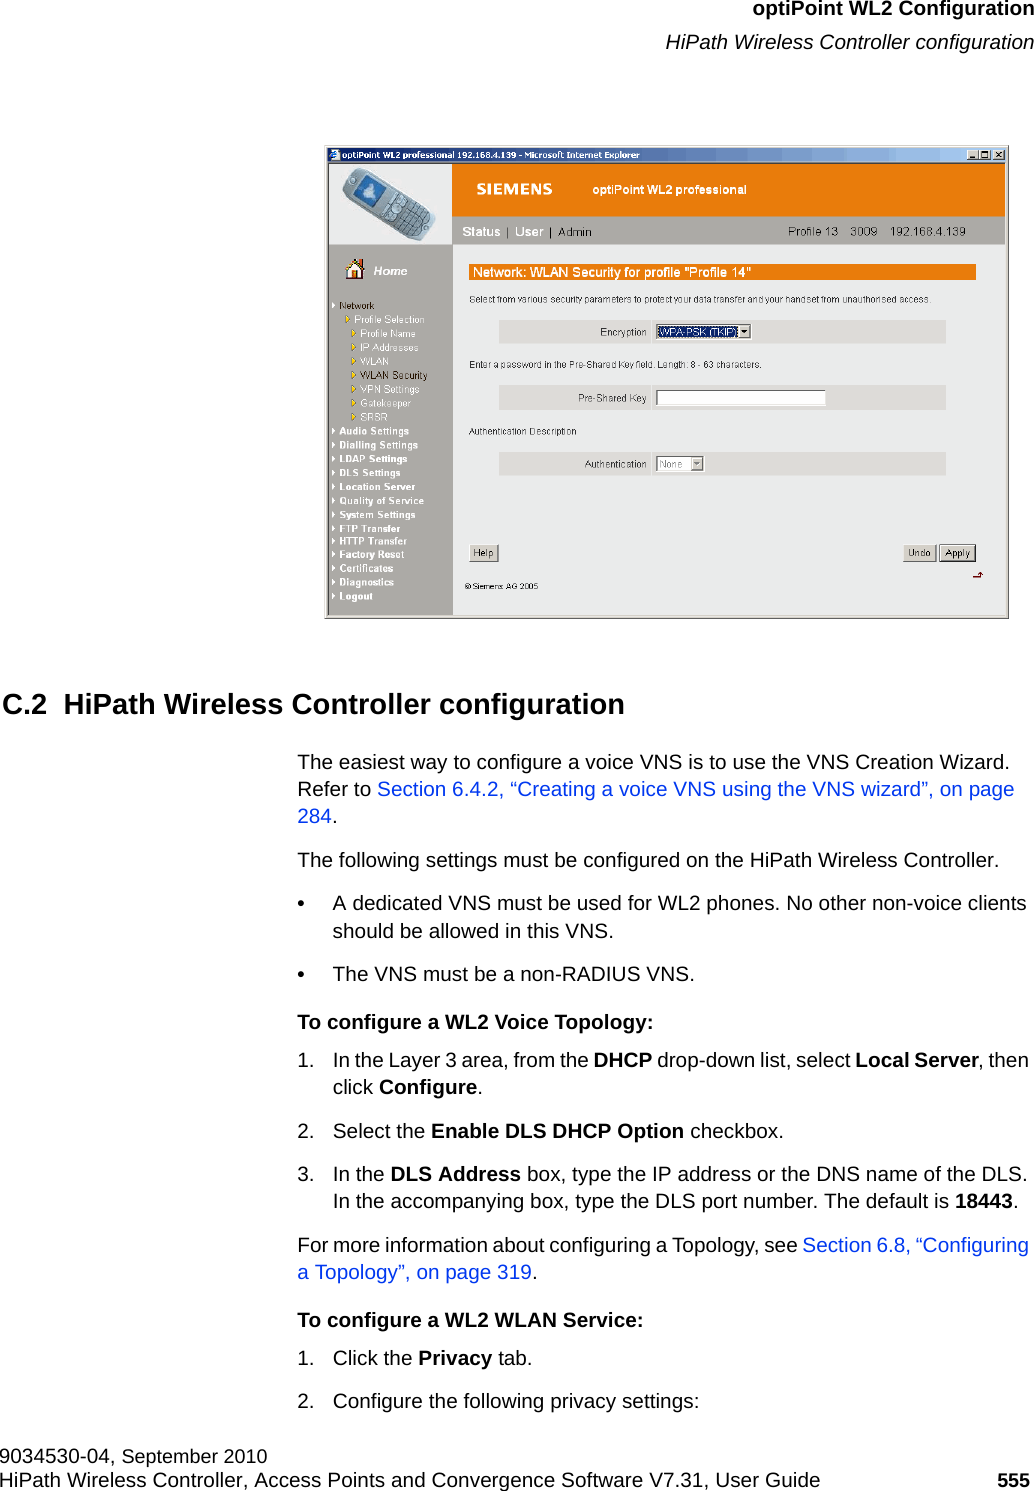 hwc_appendixc.fmoptiPoint WL2 ConfigurationHiPath Wireless Controller configuration9034530-04, September 2010HiPath Wireless Controller, Access Points and Convergence Software V7.31, User Guide 555         C.2  HiPath Wireless Controller configurationThe easiest way to configure a voice VNS is to use the VNS Creation Wizard. Refer to Section 6.4.2, “Creating a voice VNS using the VNS wizard”, on page 284.The following settings must be configured on the HiPath Wireless Controller.•A dedicated VNS must be used for WL2 phones. No other non-voice clients should be allowed in this VNS.•The VNS must be a non-RADIUS VNS.To configure a WL2 Voice Topology:1. In the Layer 3 area, from the DHCP drop-down list, select Local Server, then click Configure.2. Select the Enable DLS DHCP Option checkbox.3. In the DLS Address box, type the IP address or the DNS name of the DLS. In the accompanying box, type the DLS port number. The default is 18443.For more information about configuring a Topology, see Section 6.8, “Configuring a Topology”, on page 319.To configure a WL2 WLAN Service:1. Click the Privacy tab.2. Configure the following privacy settings: